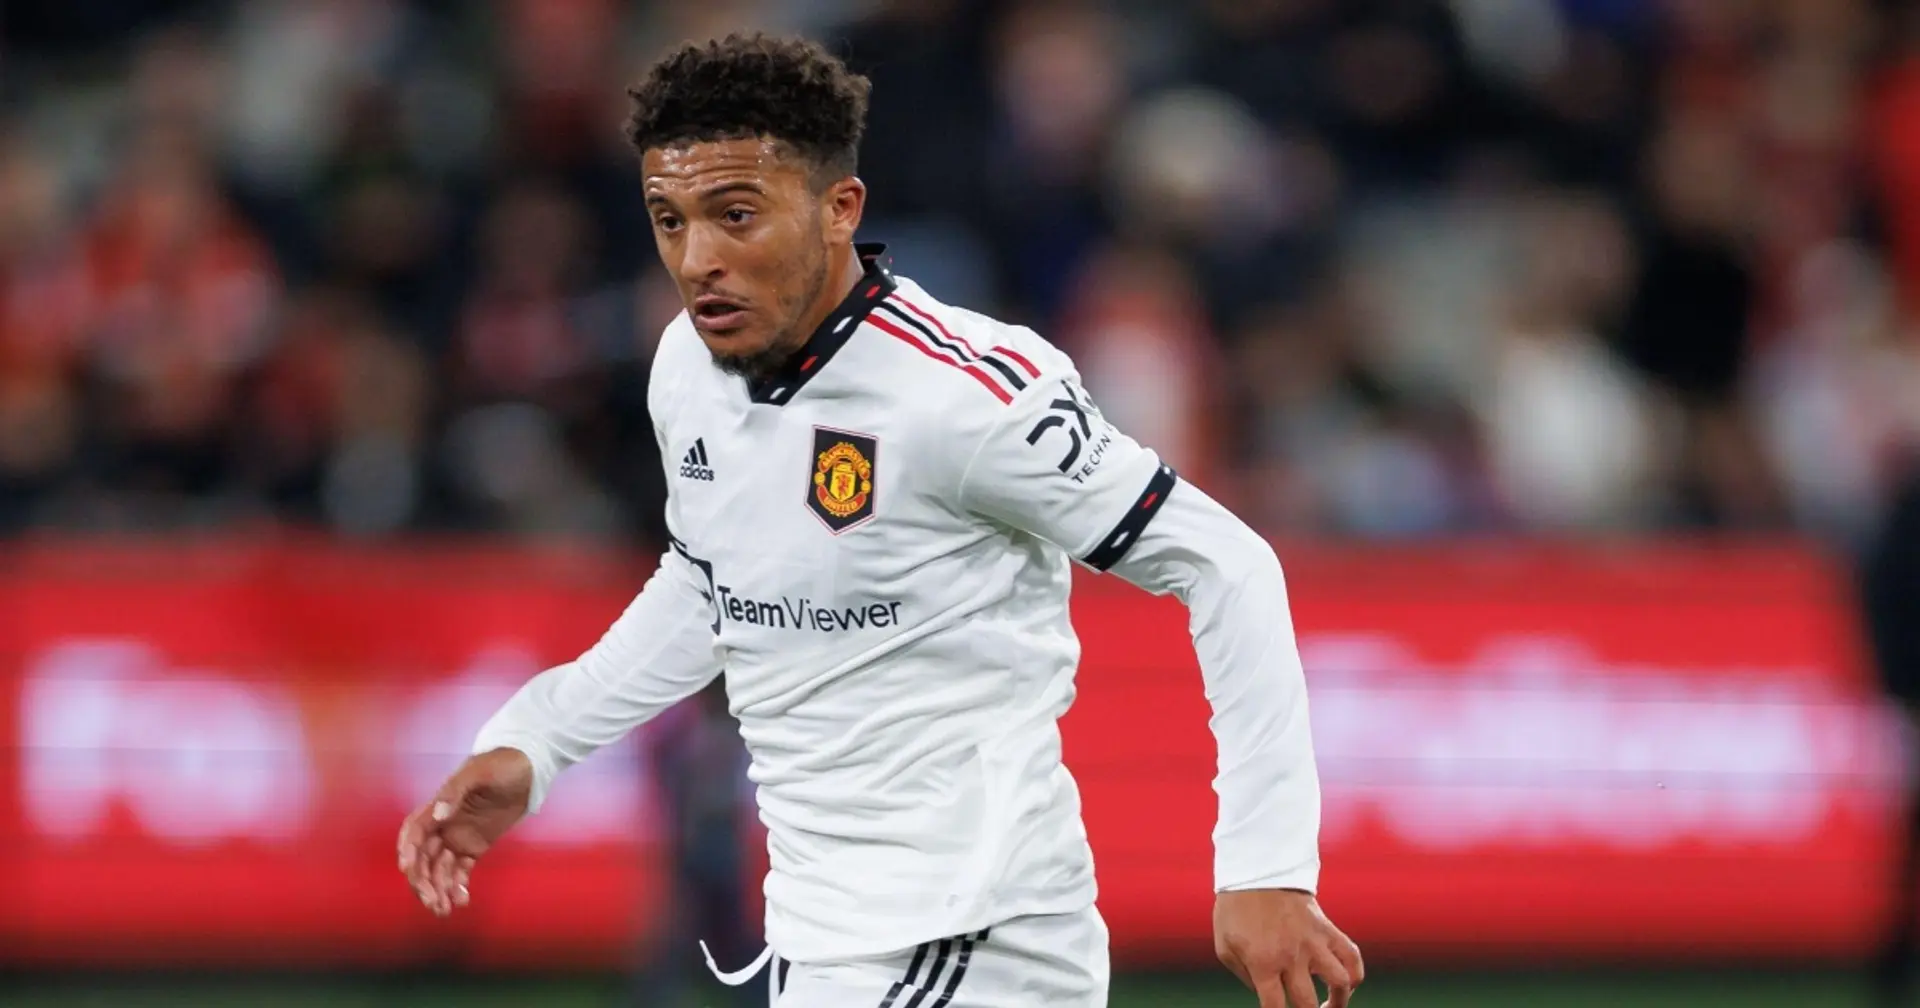 'Our best player this pre-season': Man United fans confident Jadon Sancho will deliver in 2022/23